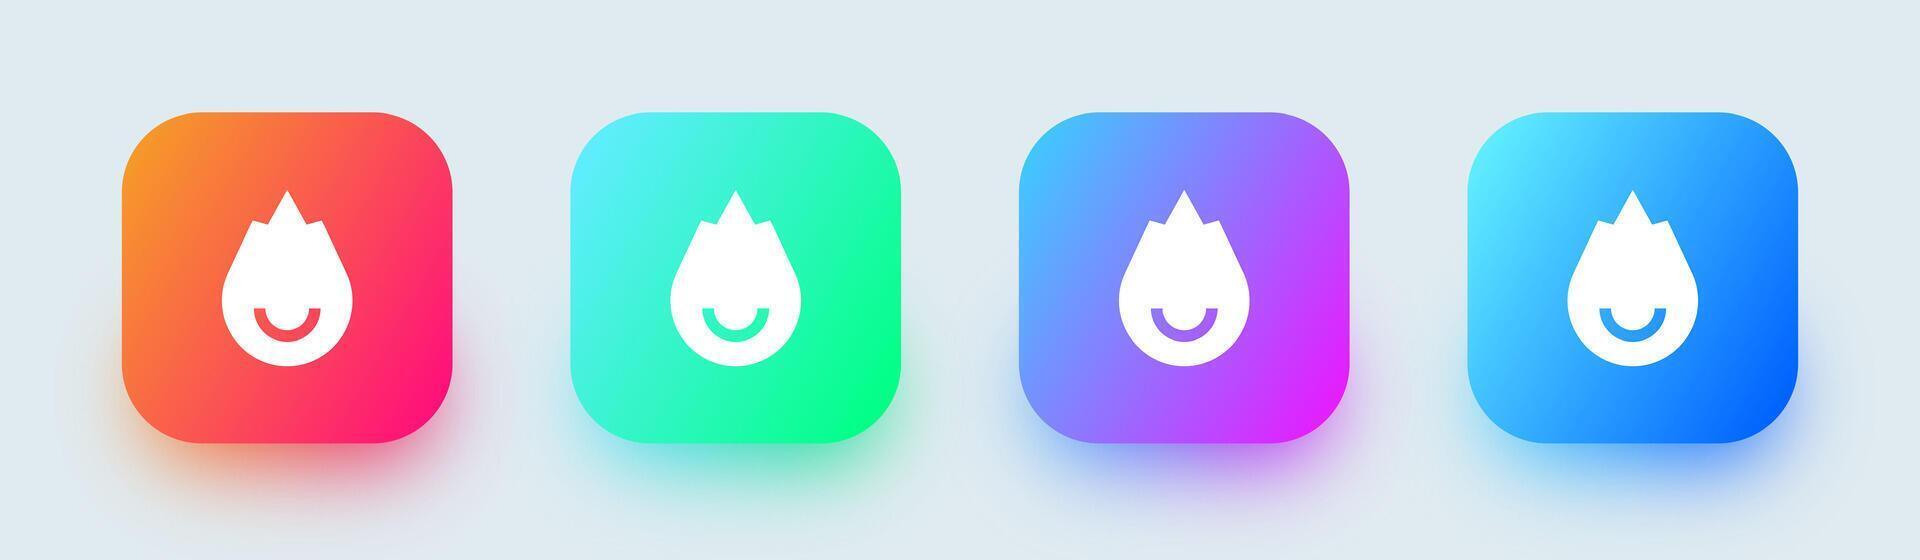 Trend solid icon in square gradient colors. Fire signs vector illustration.